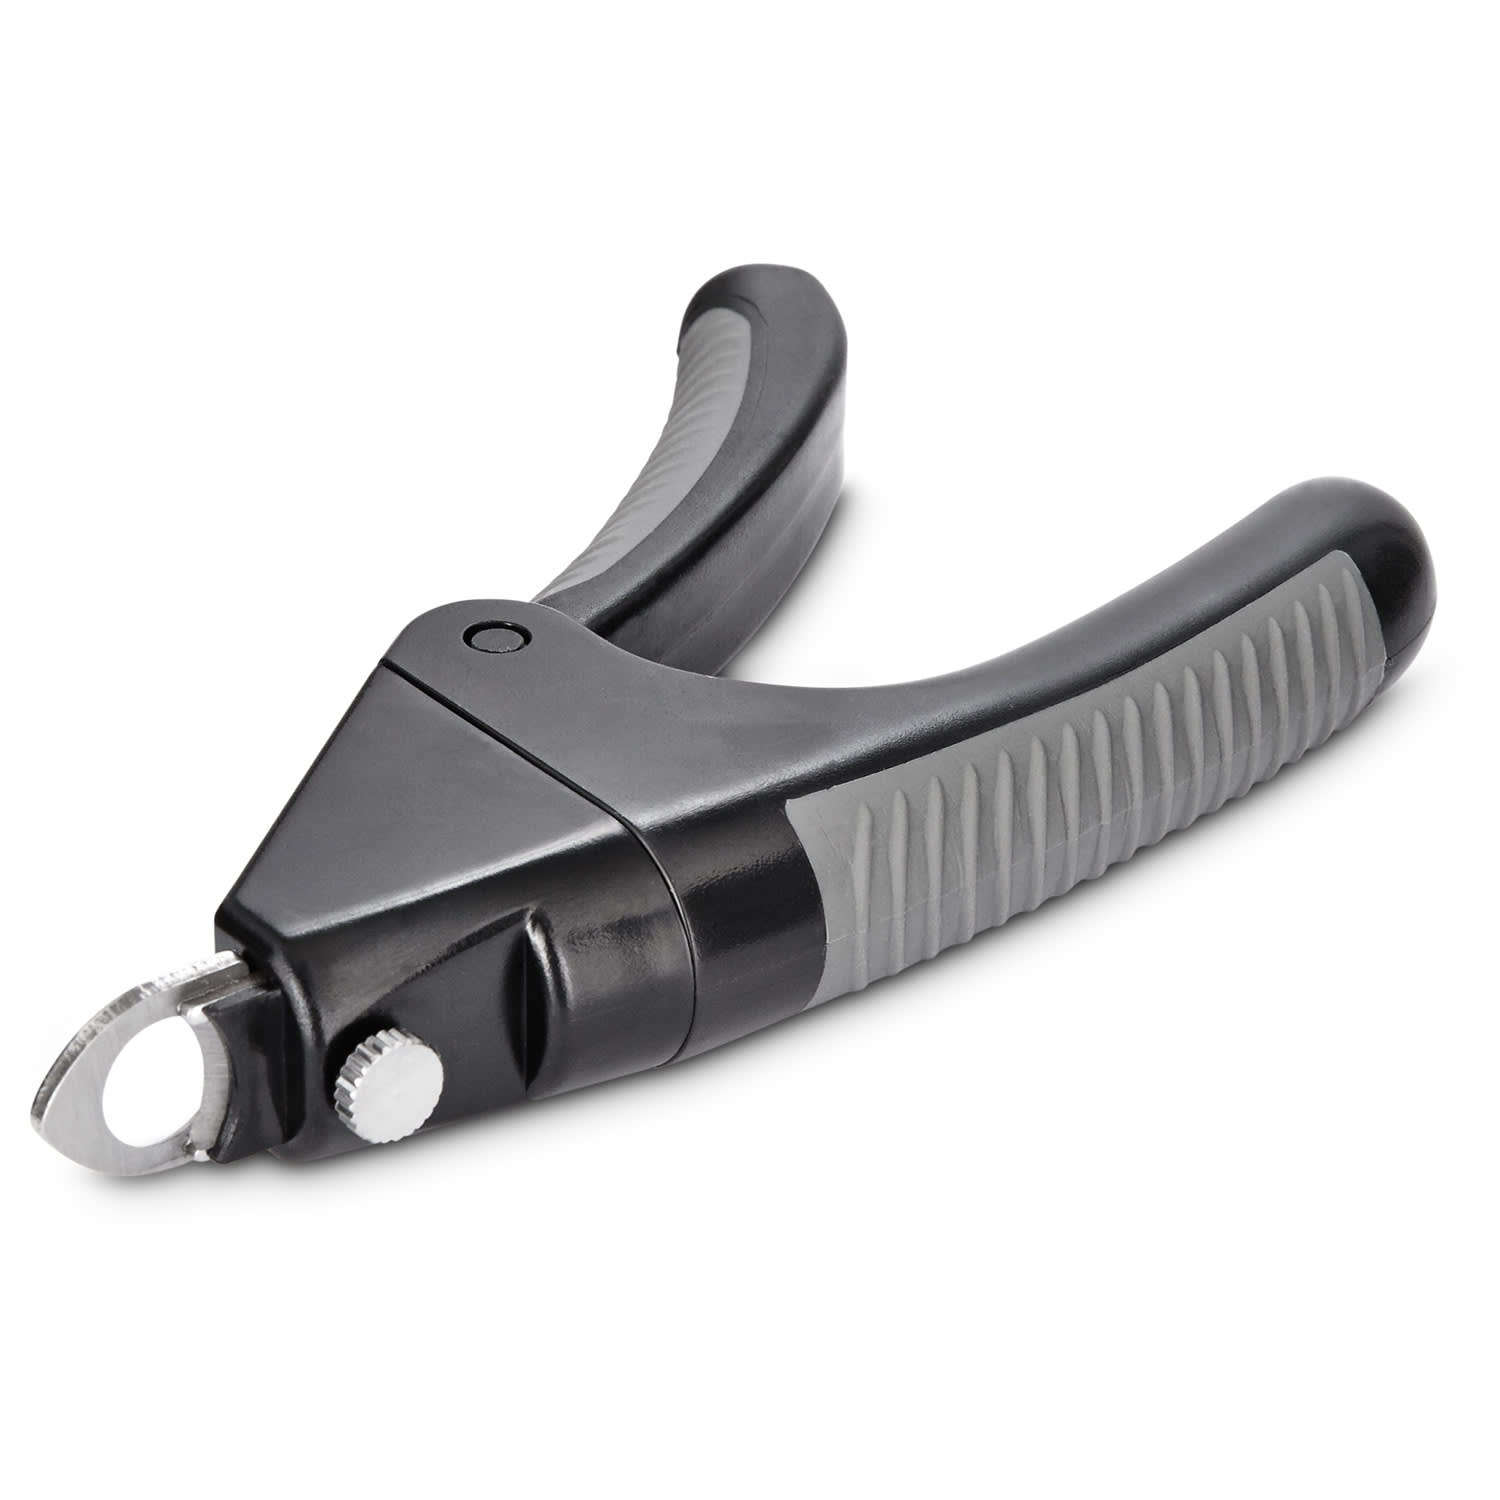 Good Guillotine Cat Nail Clippers | Petco